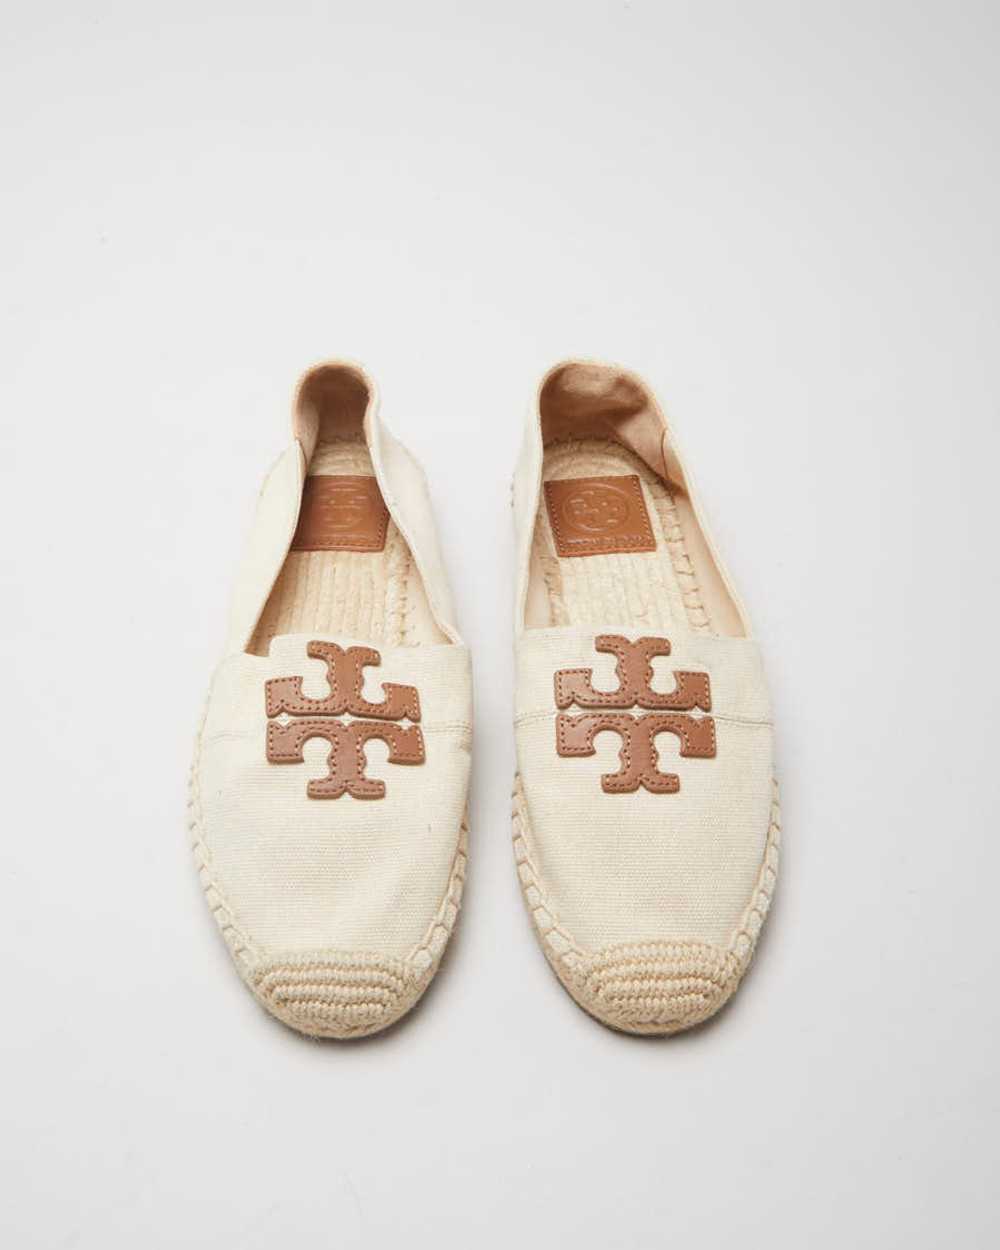 Tory Burch Cream & Brown Canvas Shoes - UK 3.5 - image 5